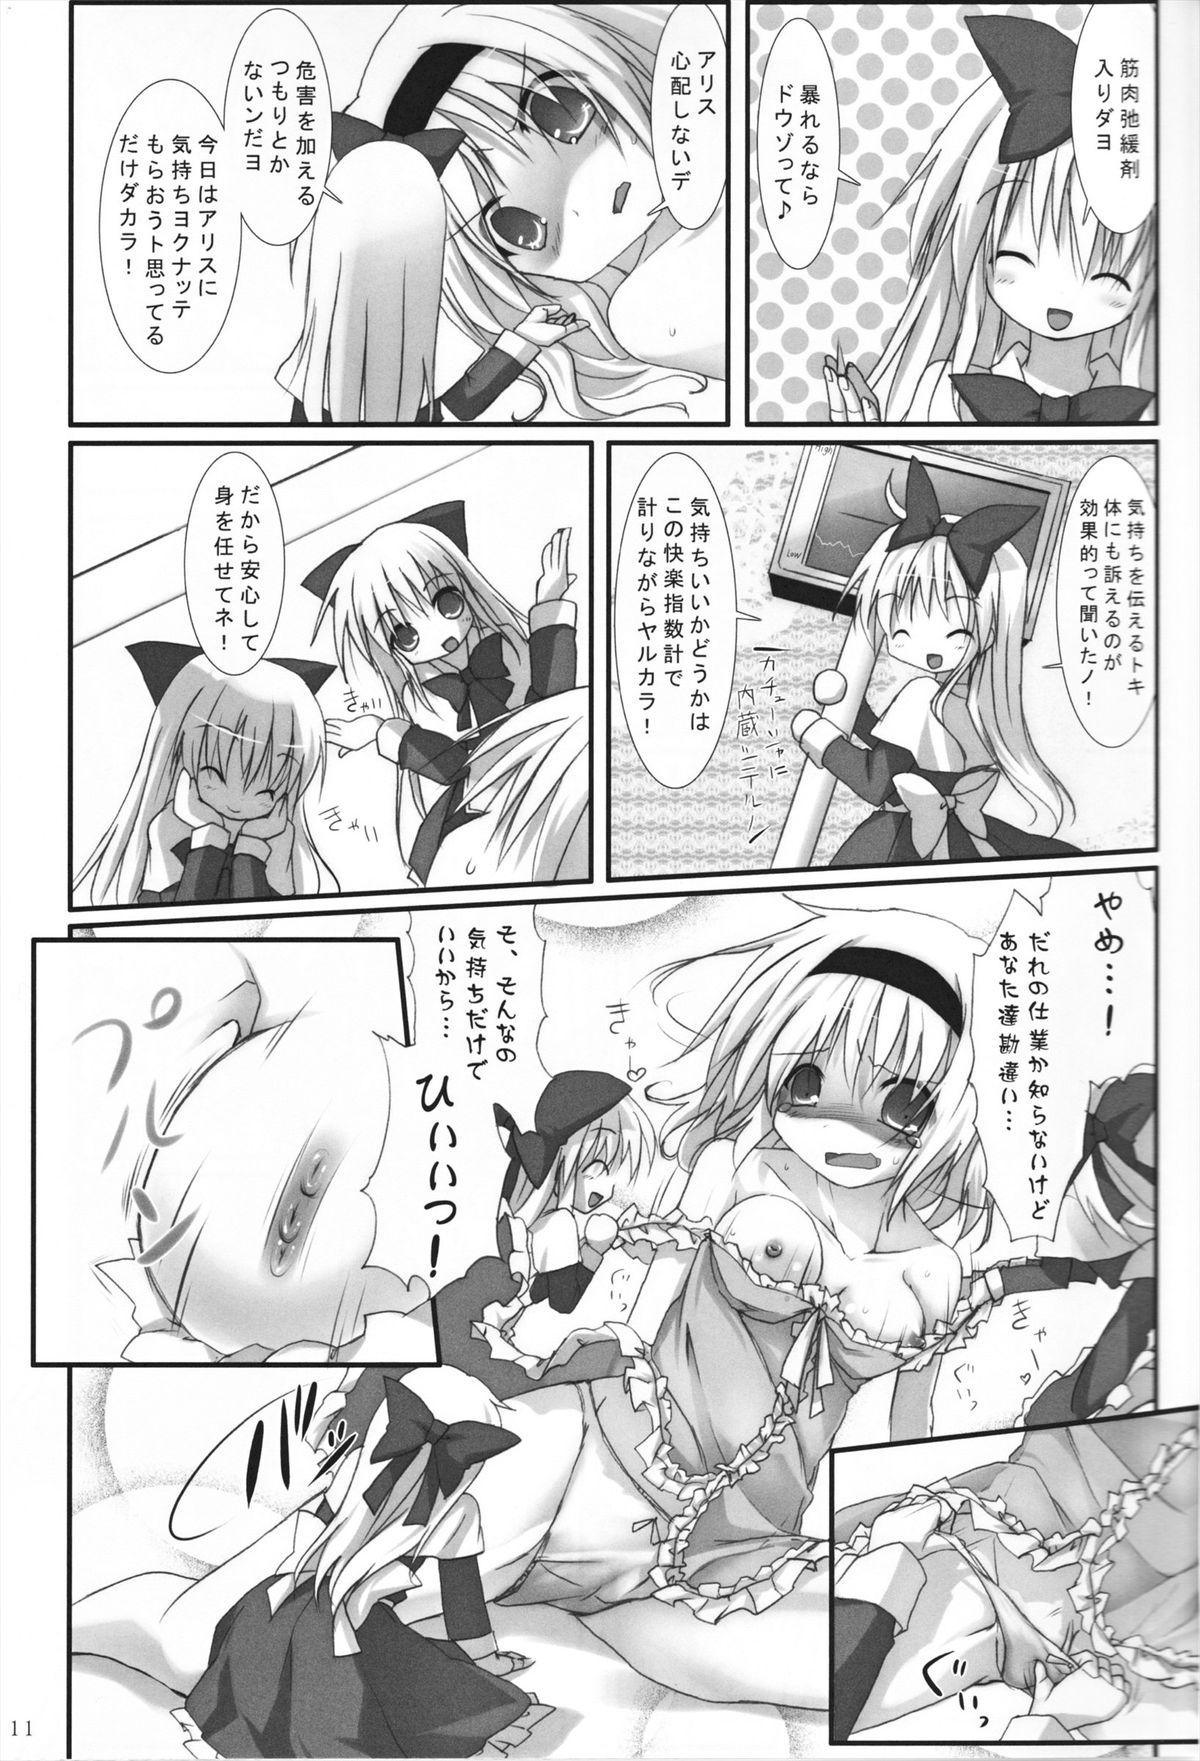 Moan Alice in Nightmare - Touhou project Dirty Talk - Page 11